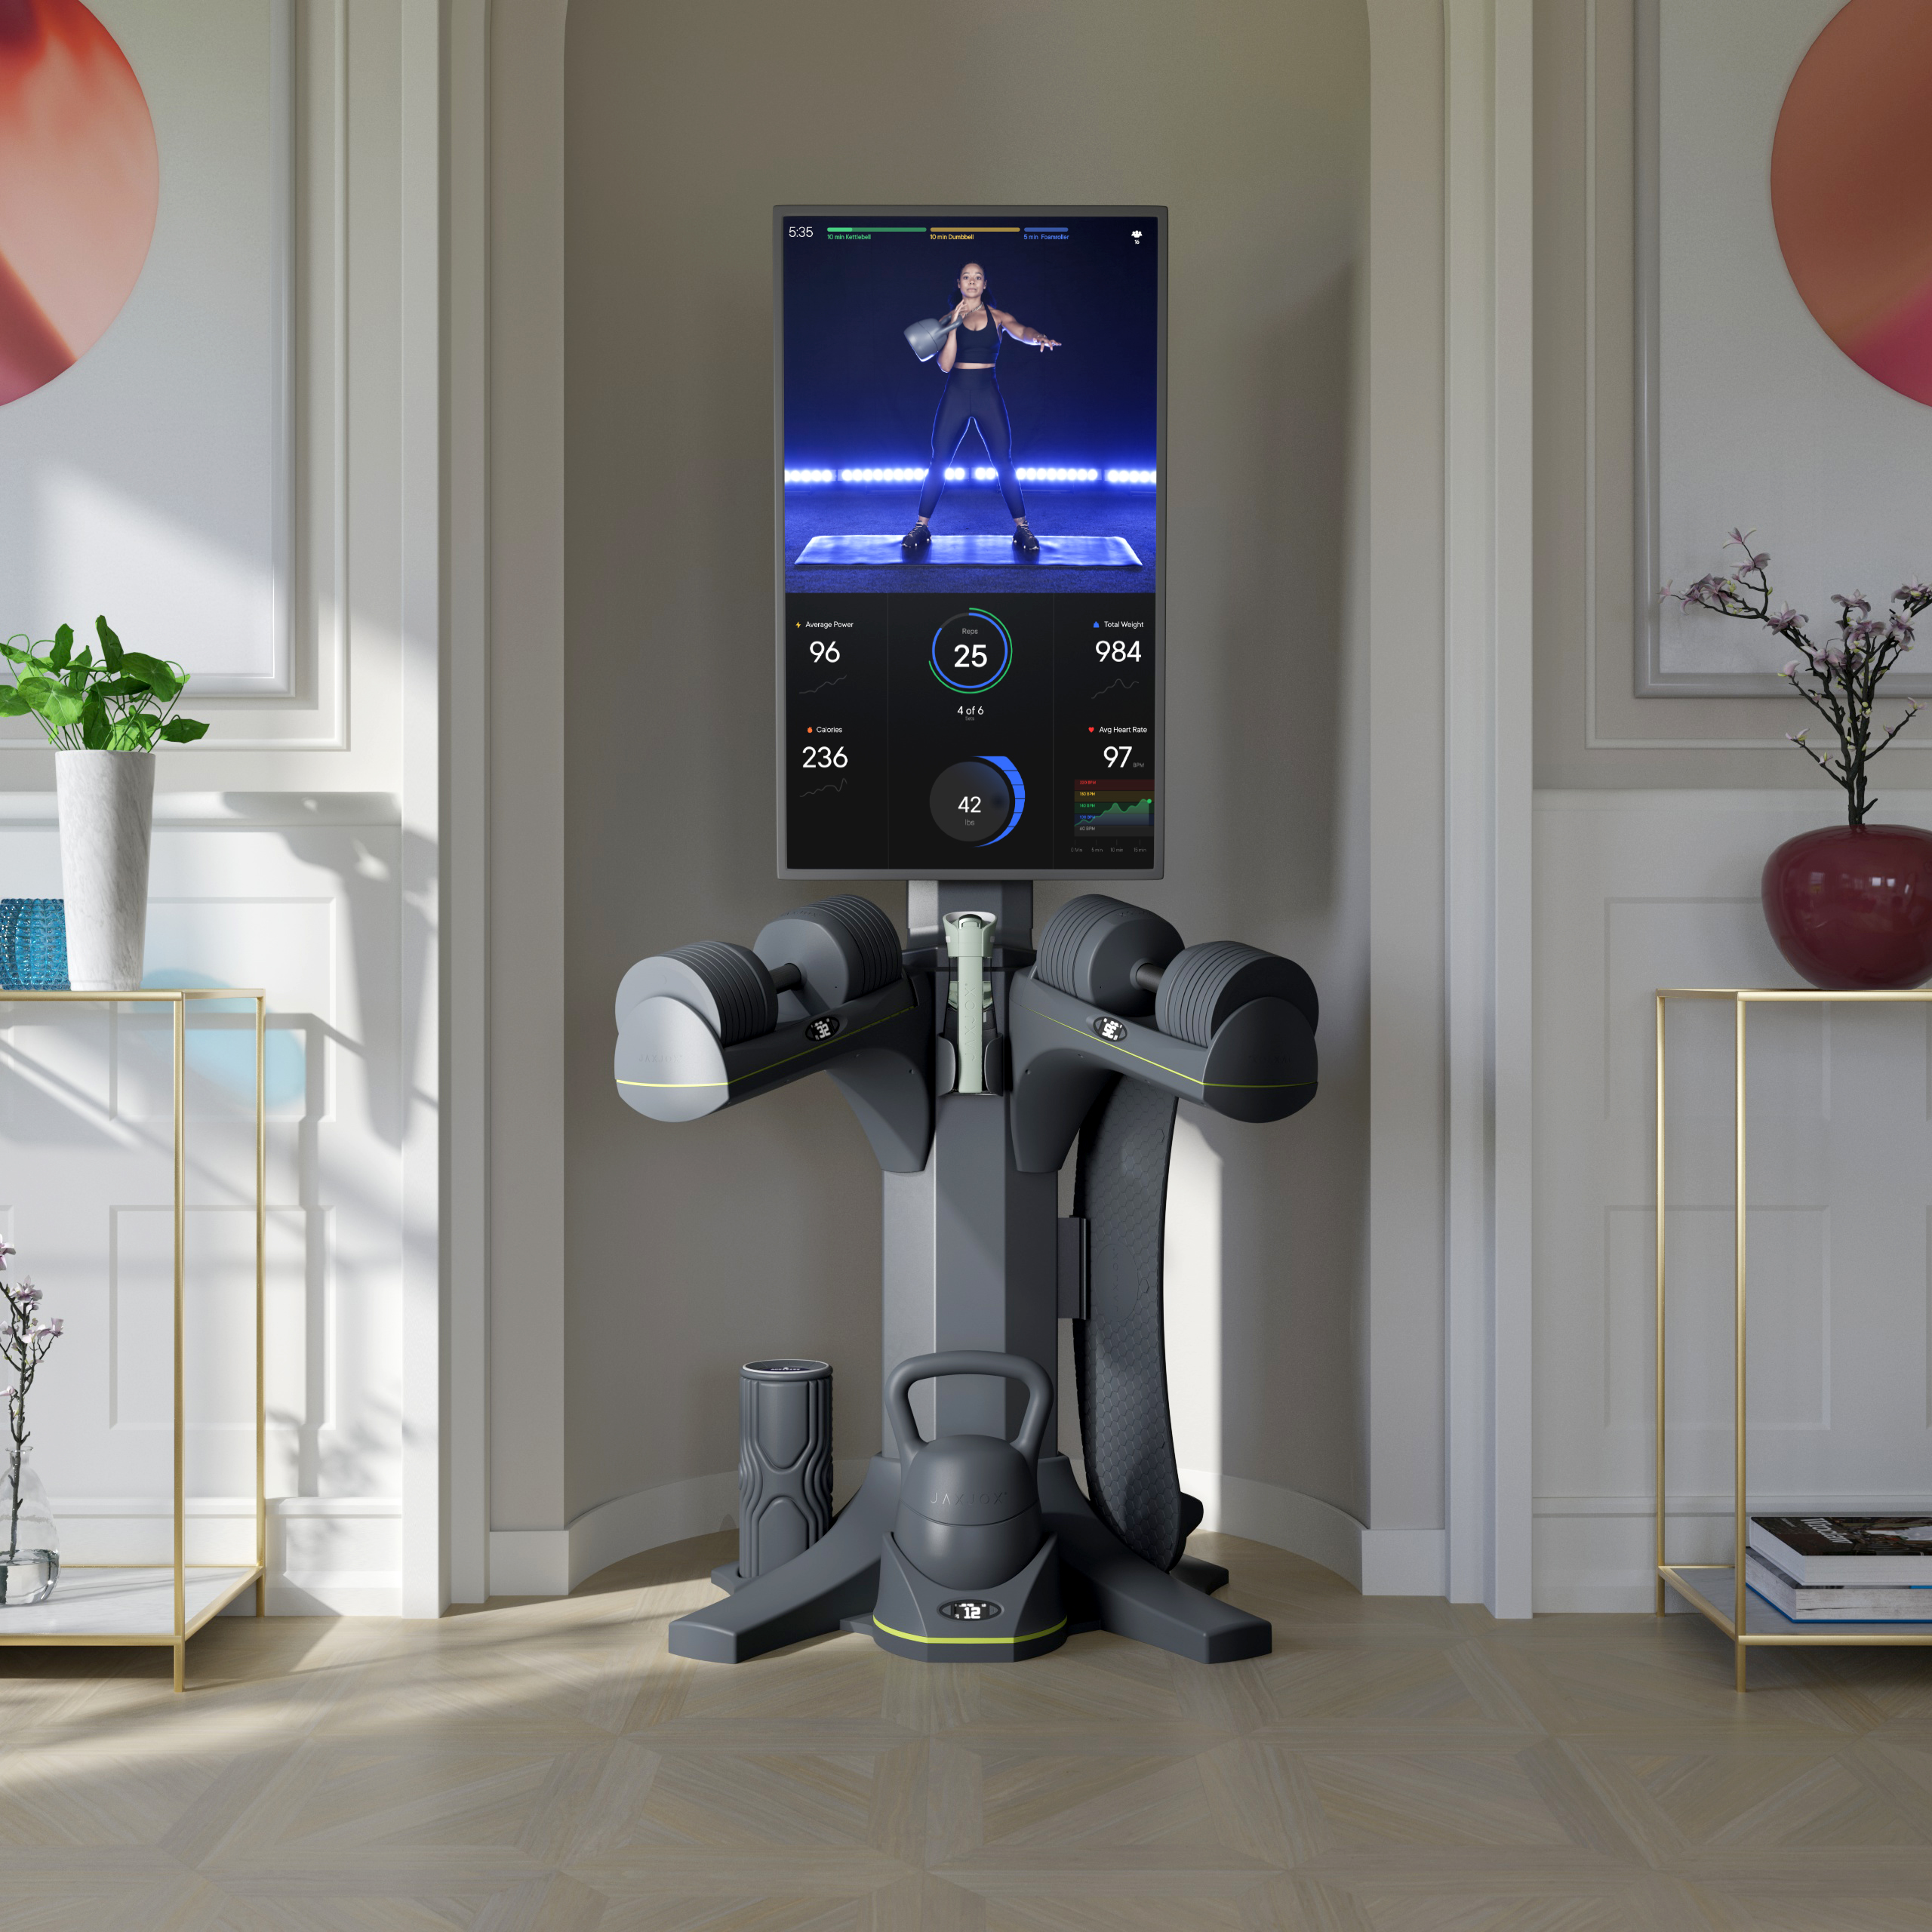 JAXJOX made an interactive fitness studio you can build over time